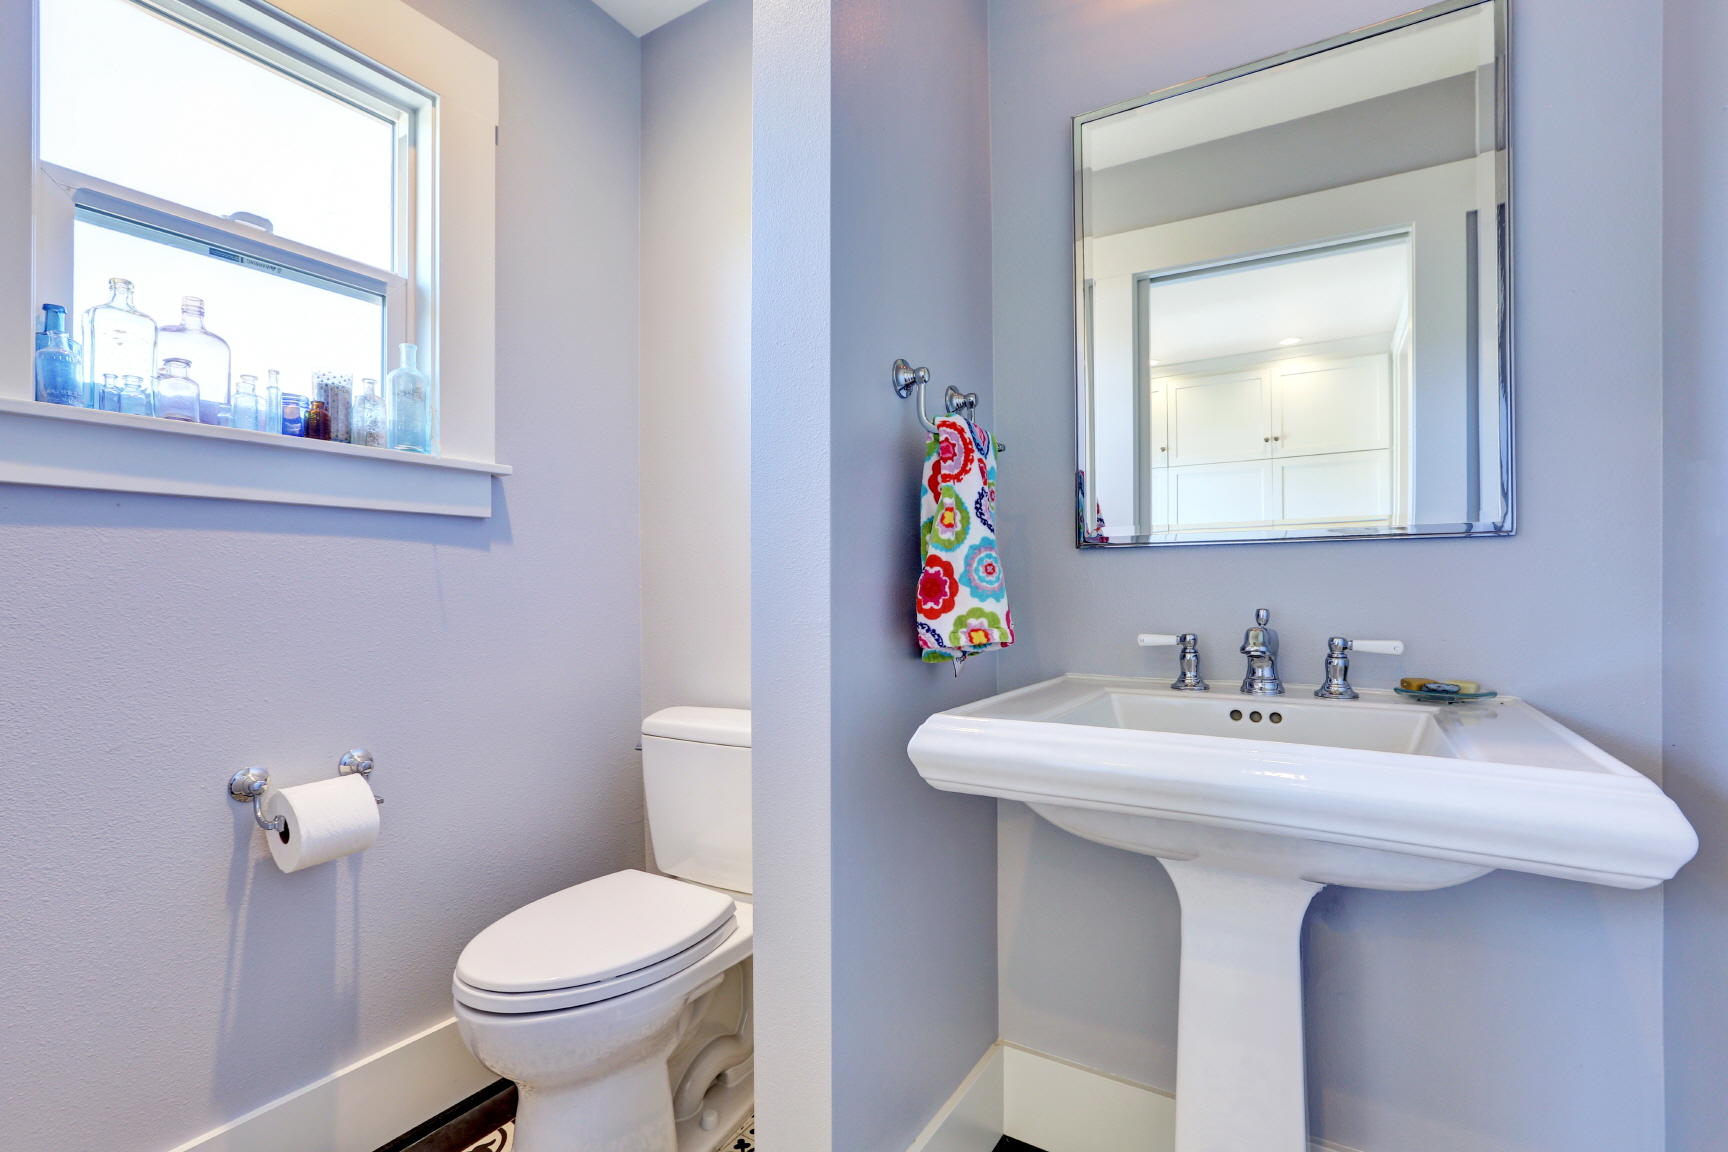 Pale blue makes small bathrooms feel spacious and soothing. Add white trim and natural elements for a relaxed vibe.